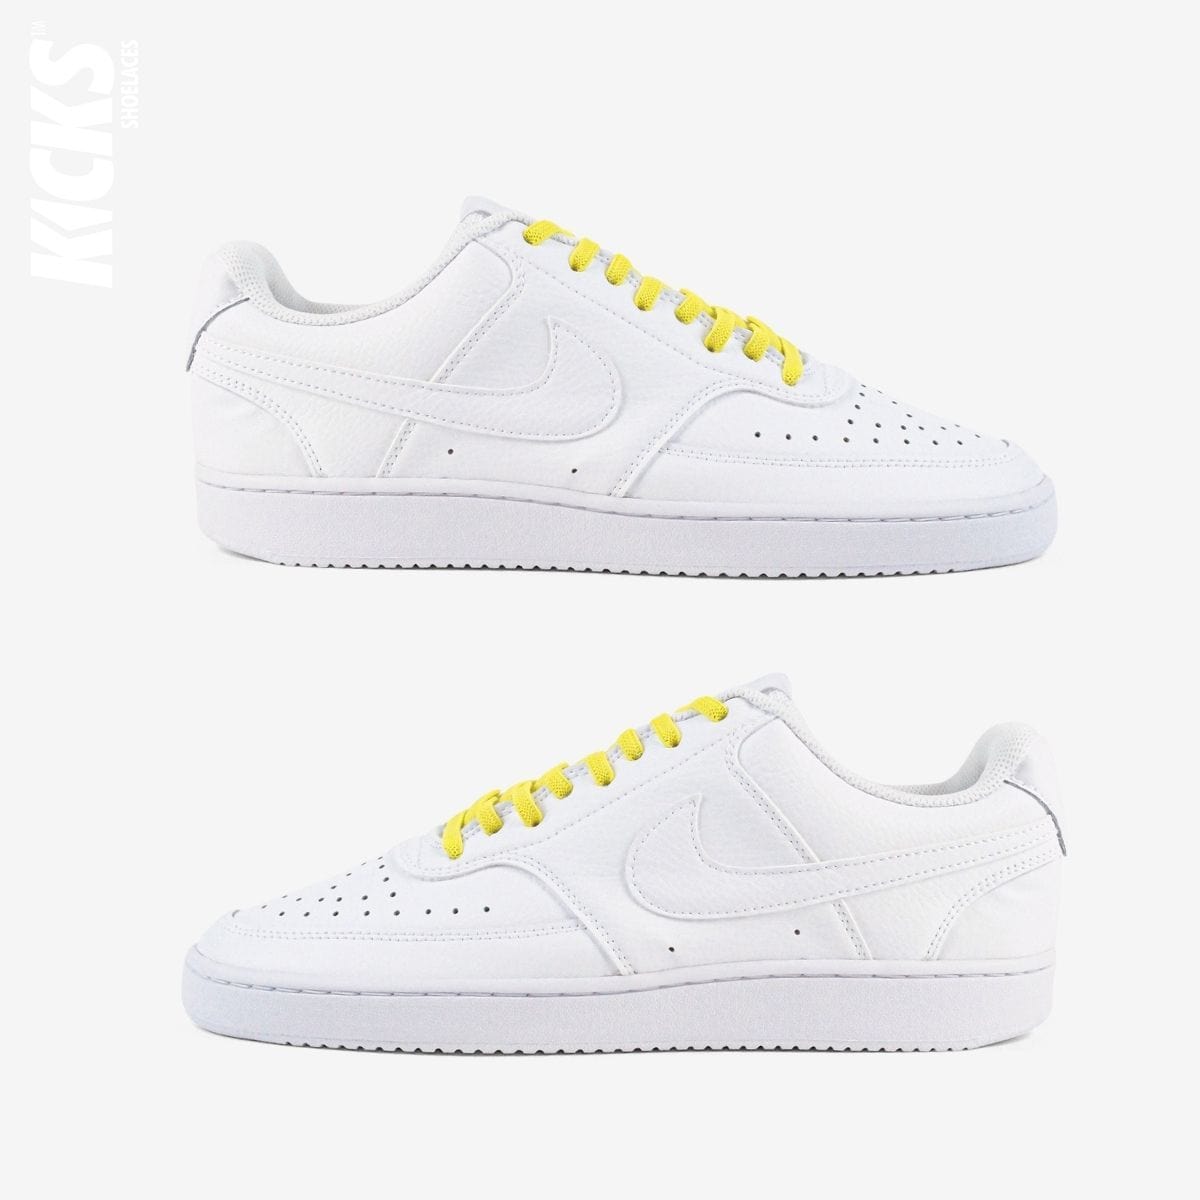 tieless-laces-with-yellow-laces-on-nike-white-sneakers-by-kicks-shoelaces